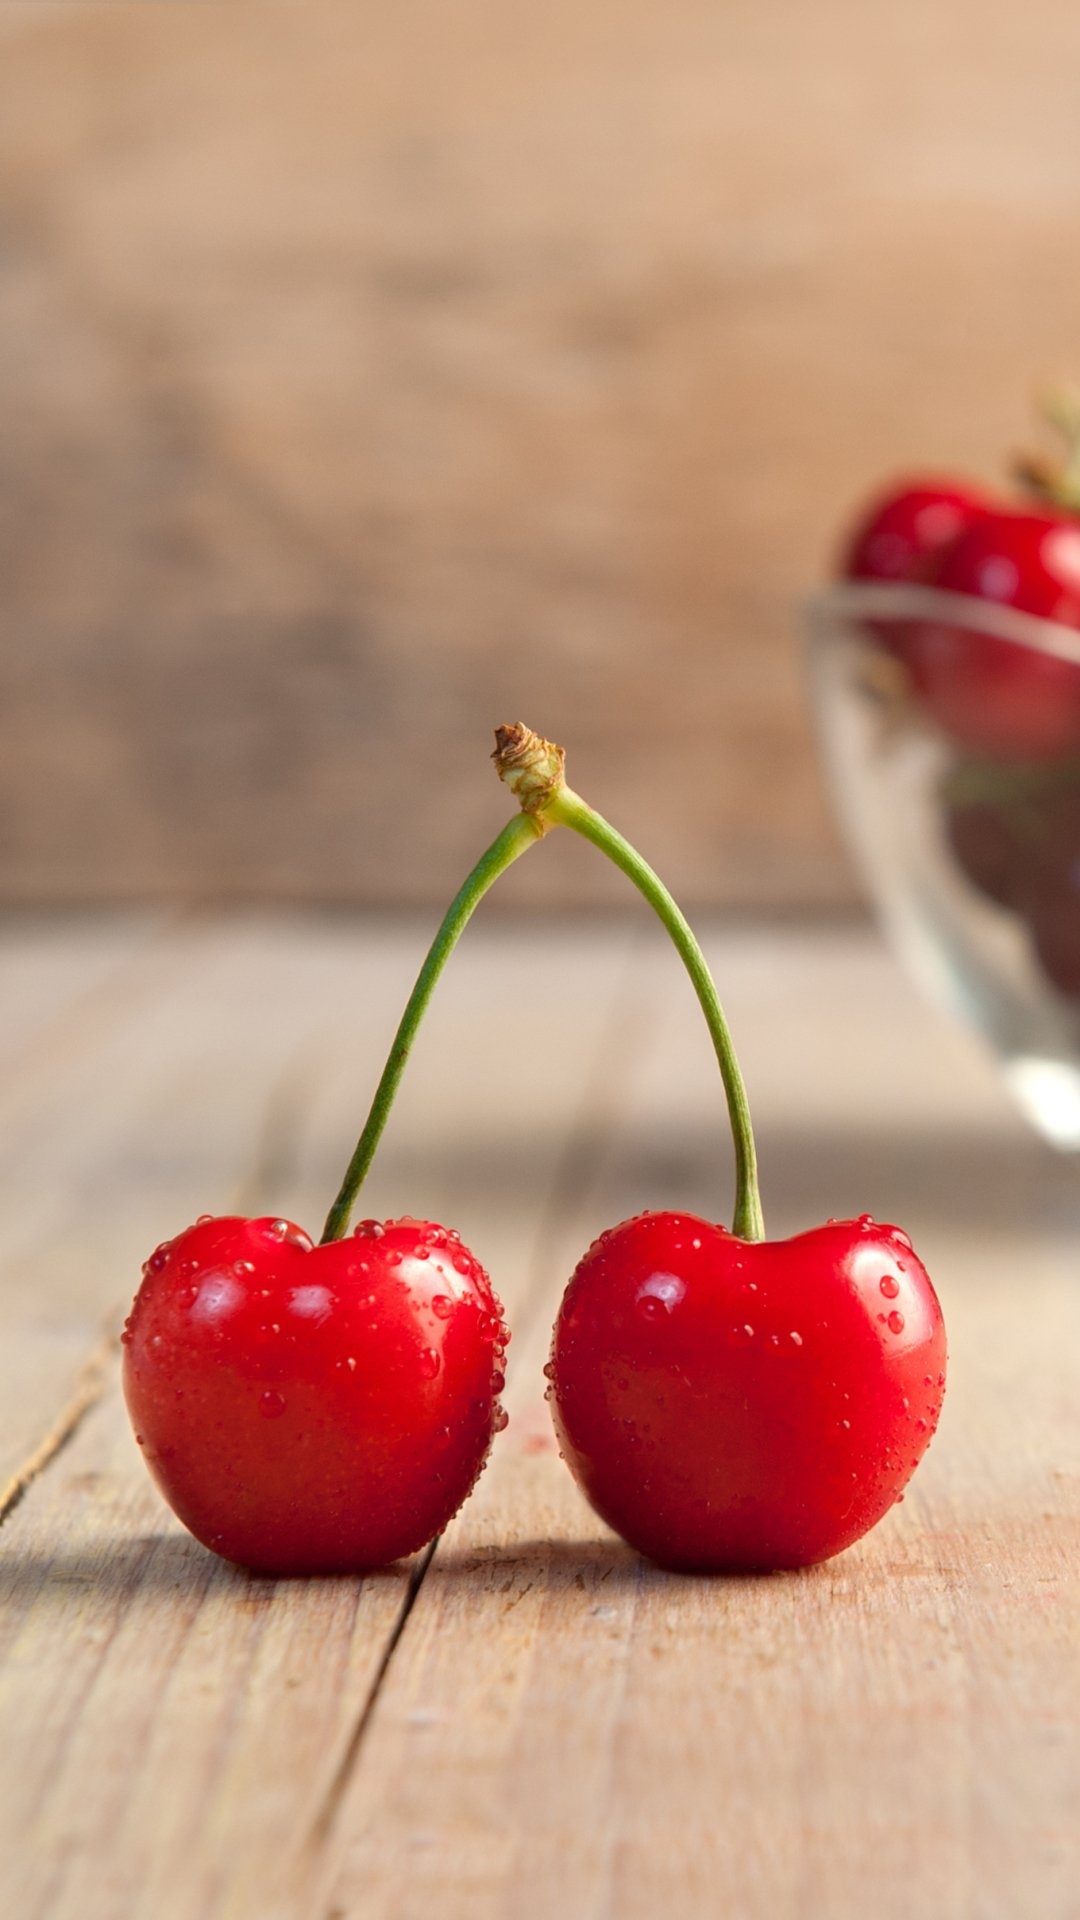 Cherry: Drupe, Related to plums and more distantly to peaches and nectarines. 1080x1920 Full HD Wallpaper.